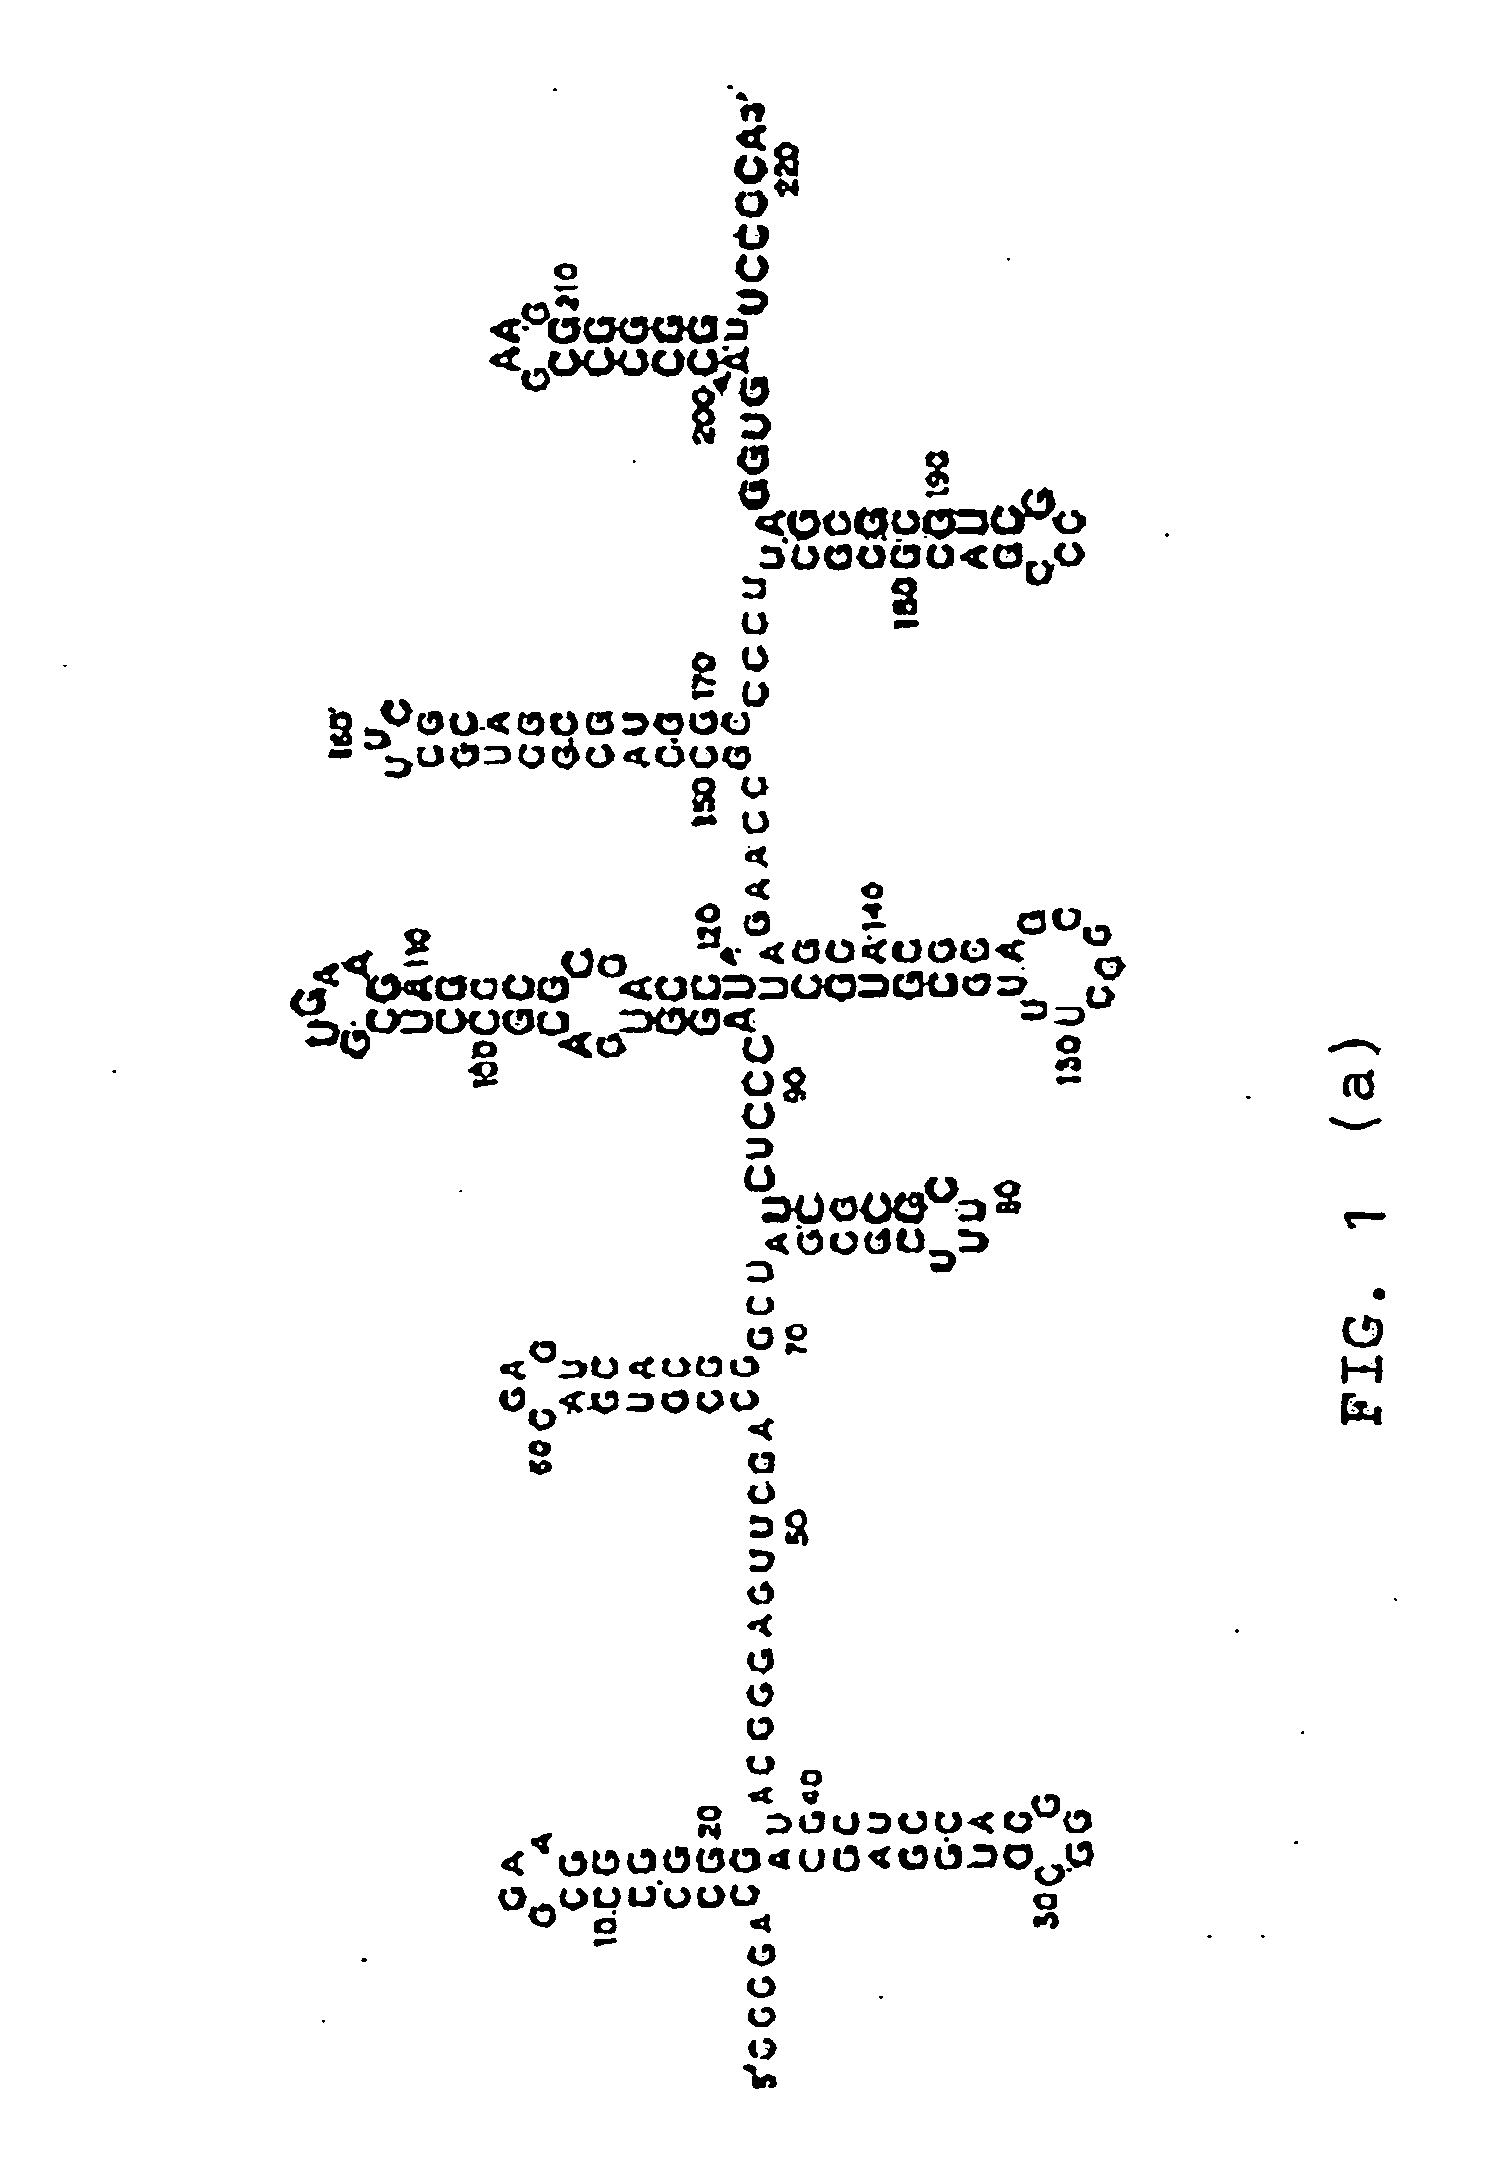 Agglomeration protein cascades, compositions and methods regarding the same